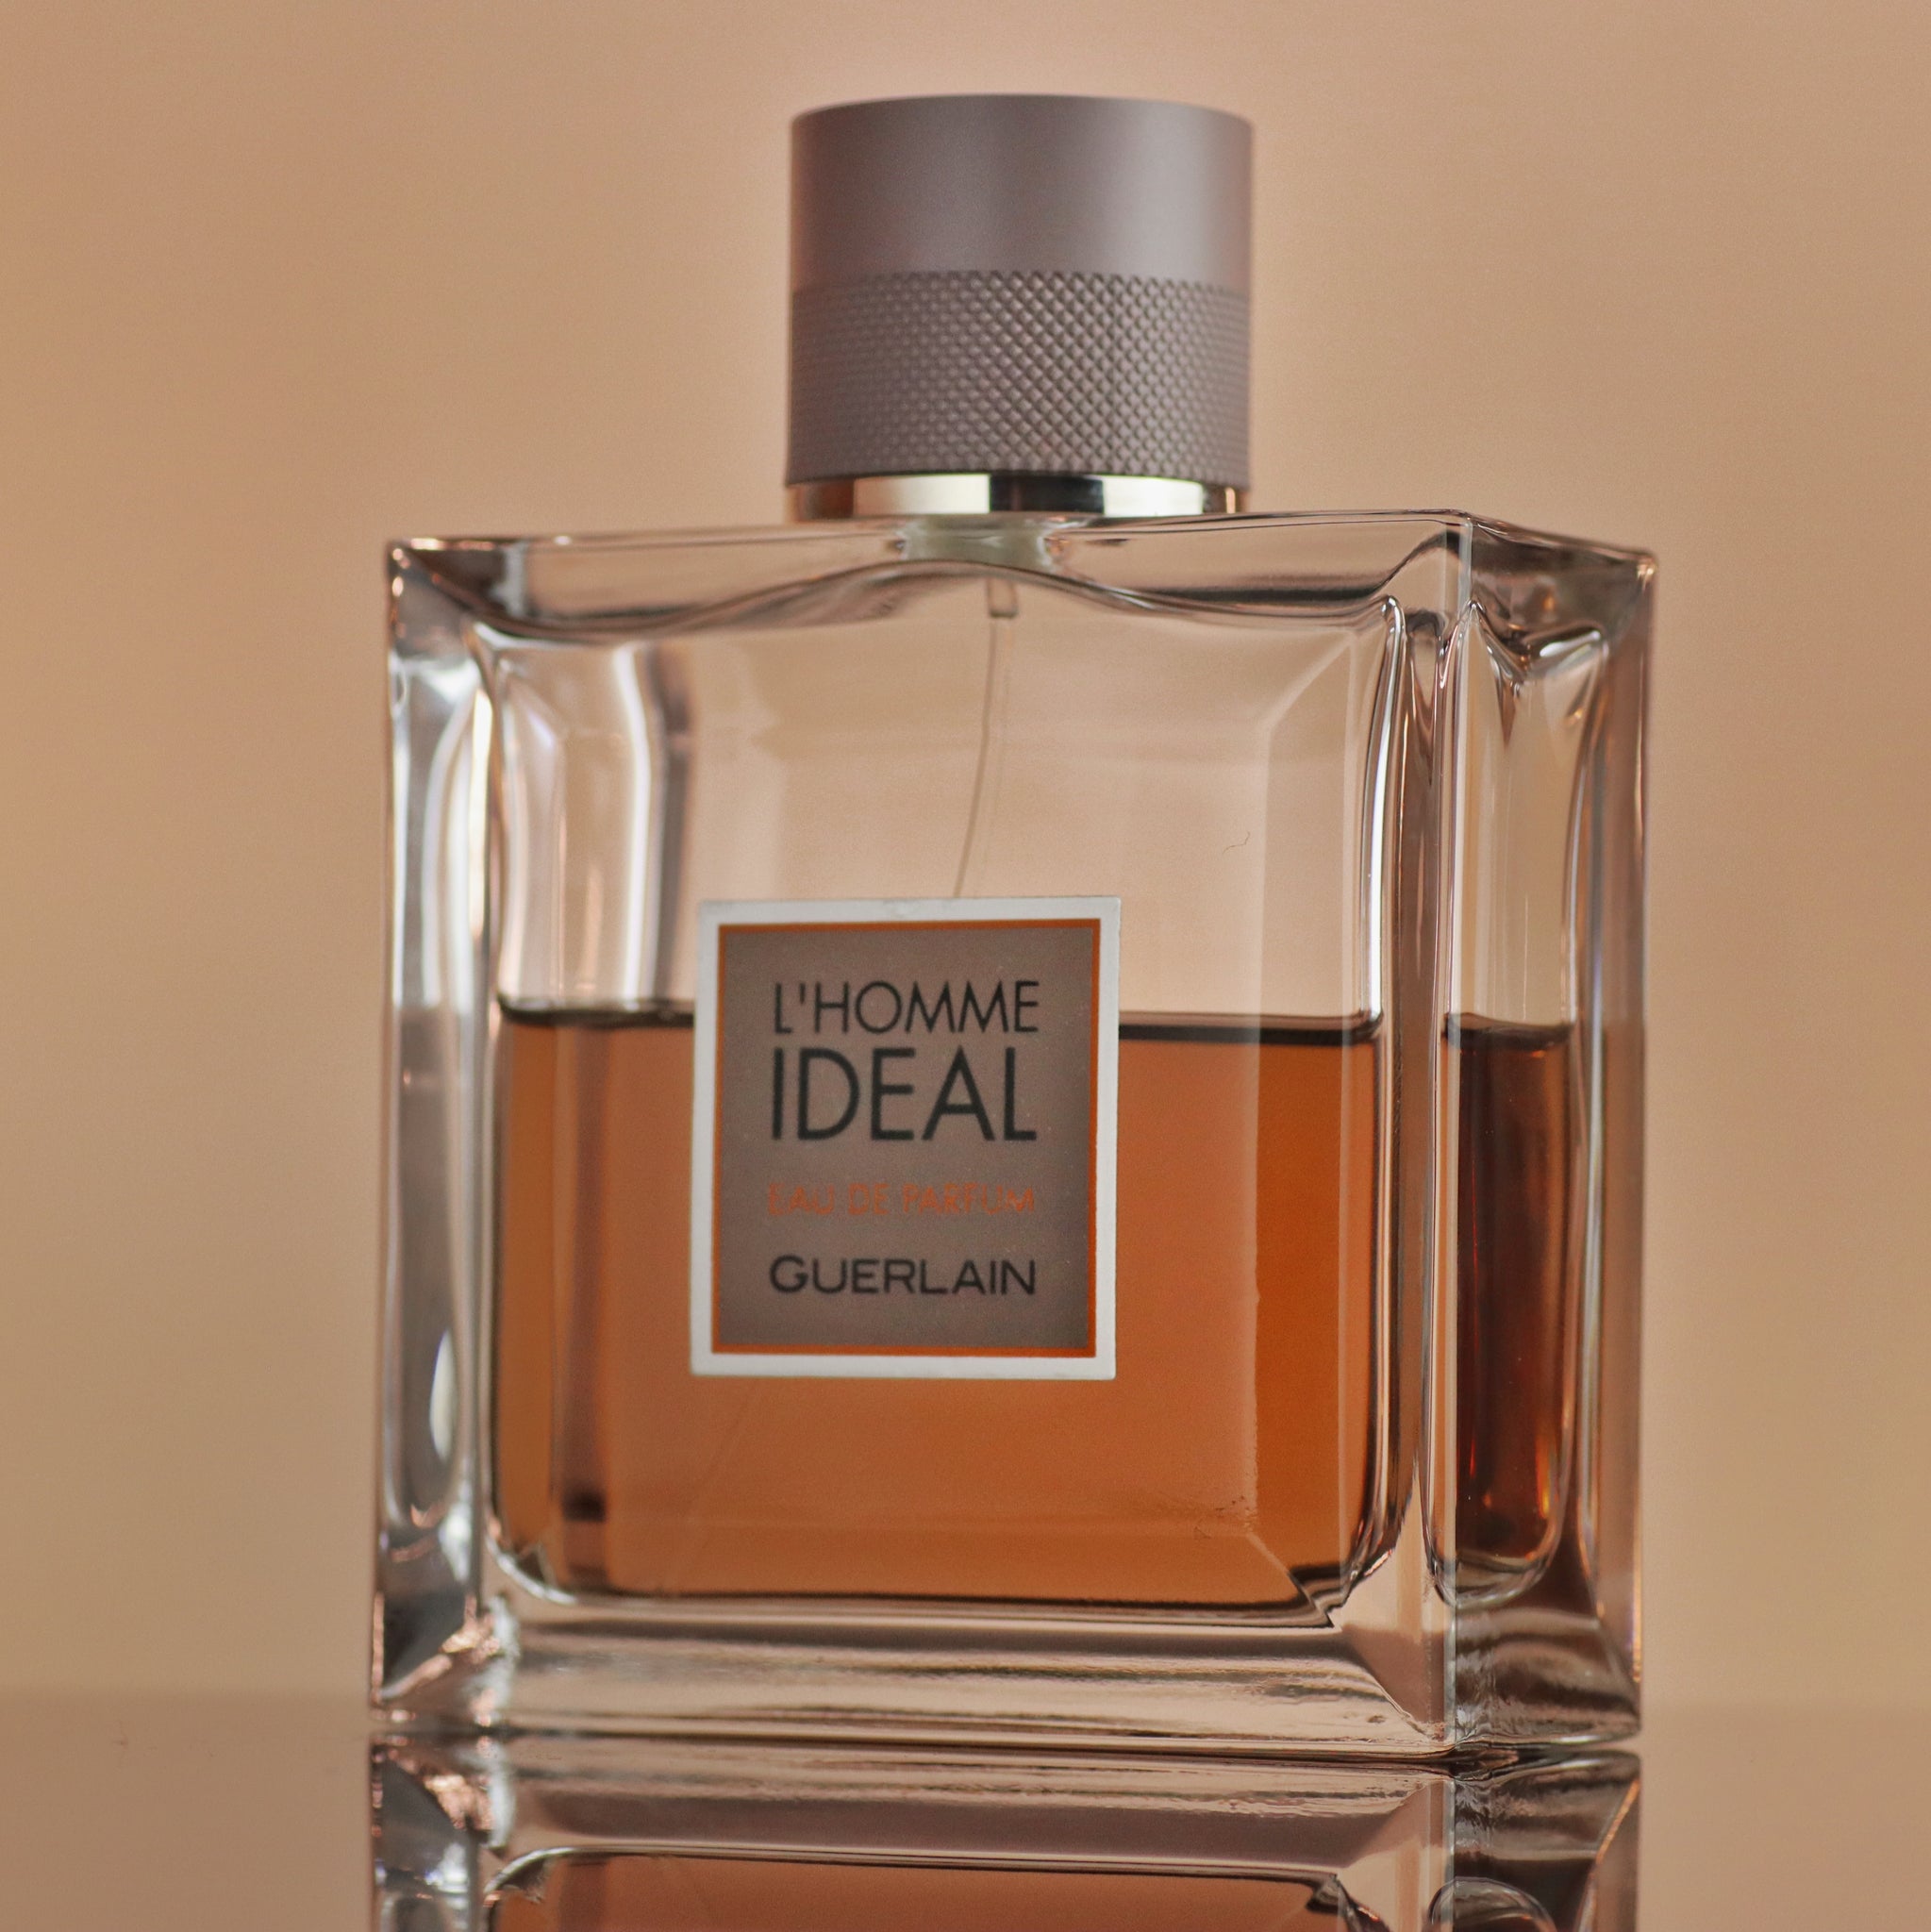 Persolaise Review: L'Homme Ideal from Guerlain (Thierry Wasser